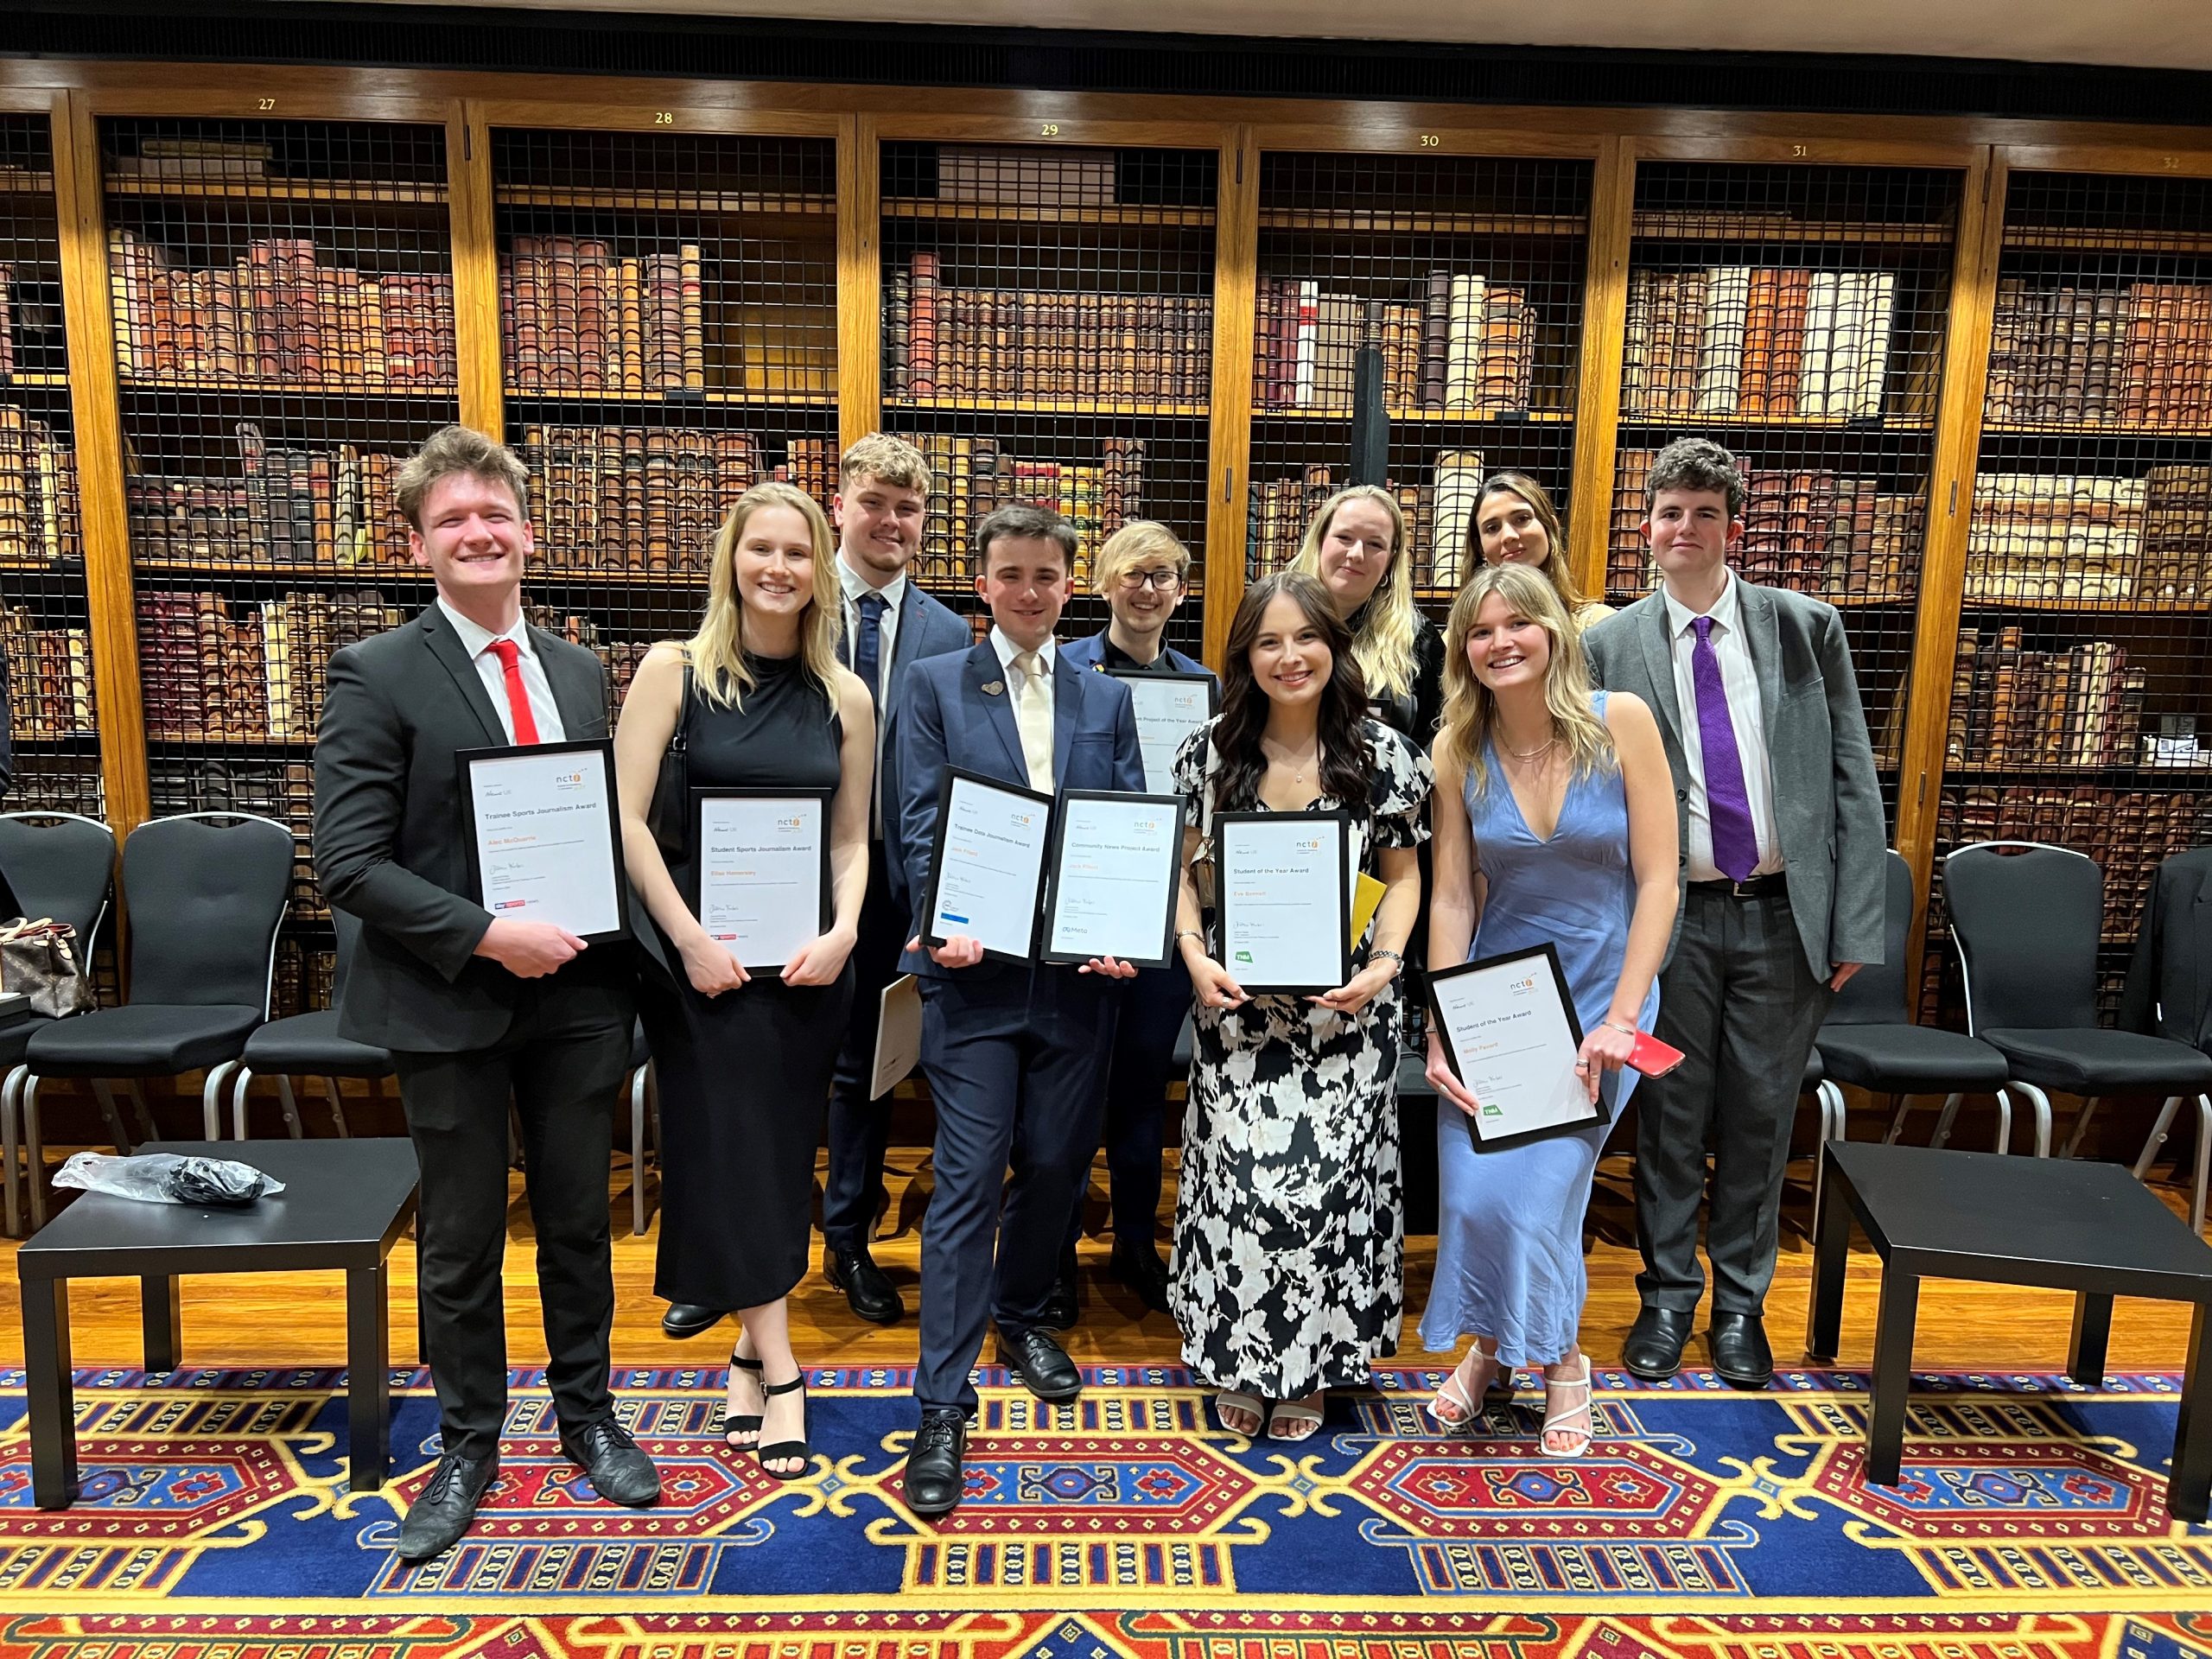 All of our News Associates grads shortlisted for the NCTJ Awards for Excellence standing and holding their certificates and smiling. They are all smartly dressed and standing in front of rows of books on a shelf in the library at the Royal College of Physicians.